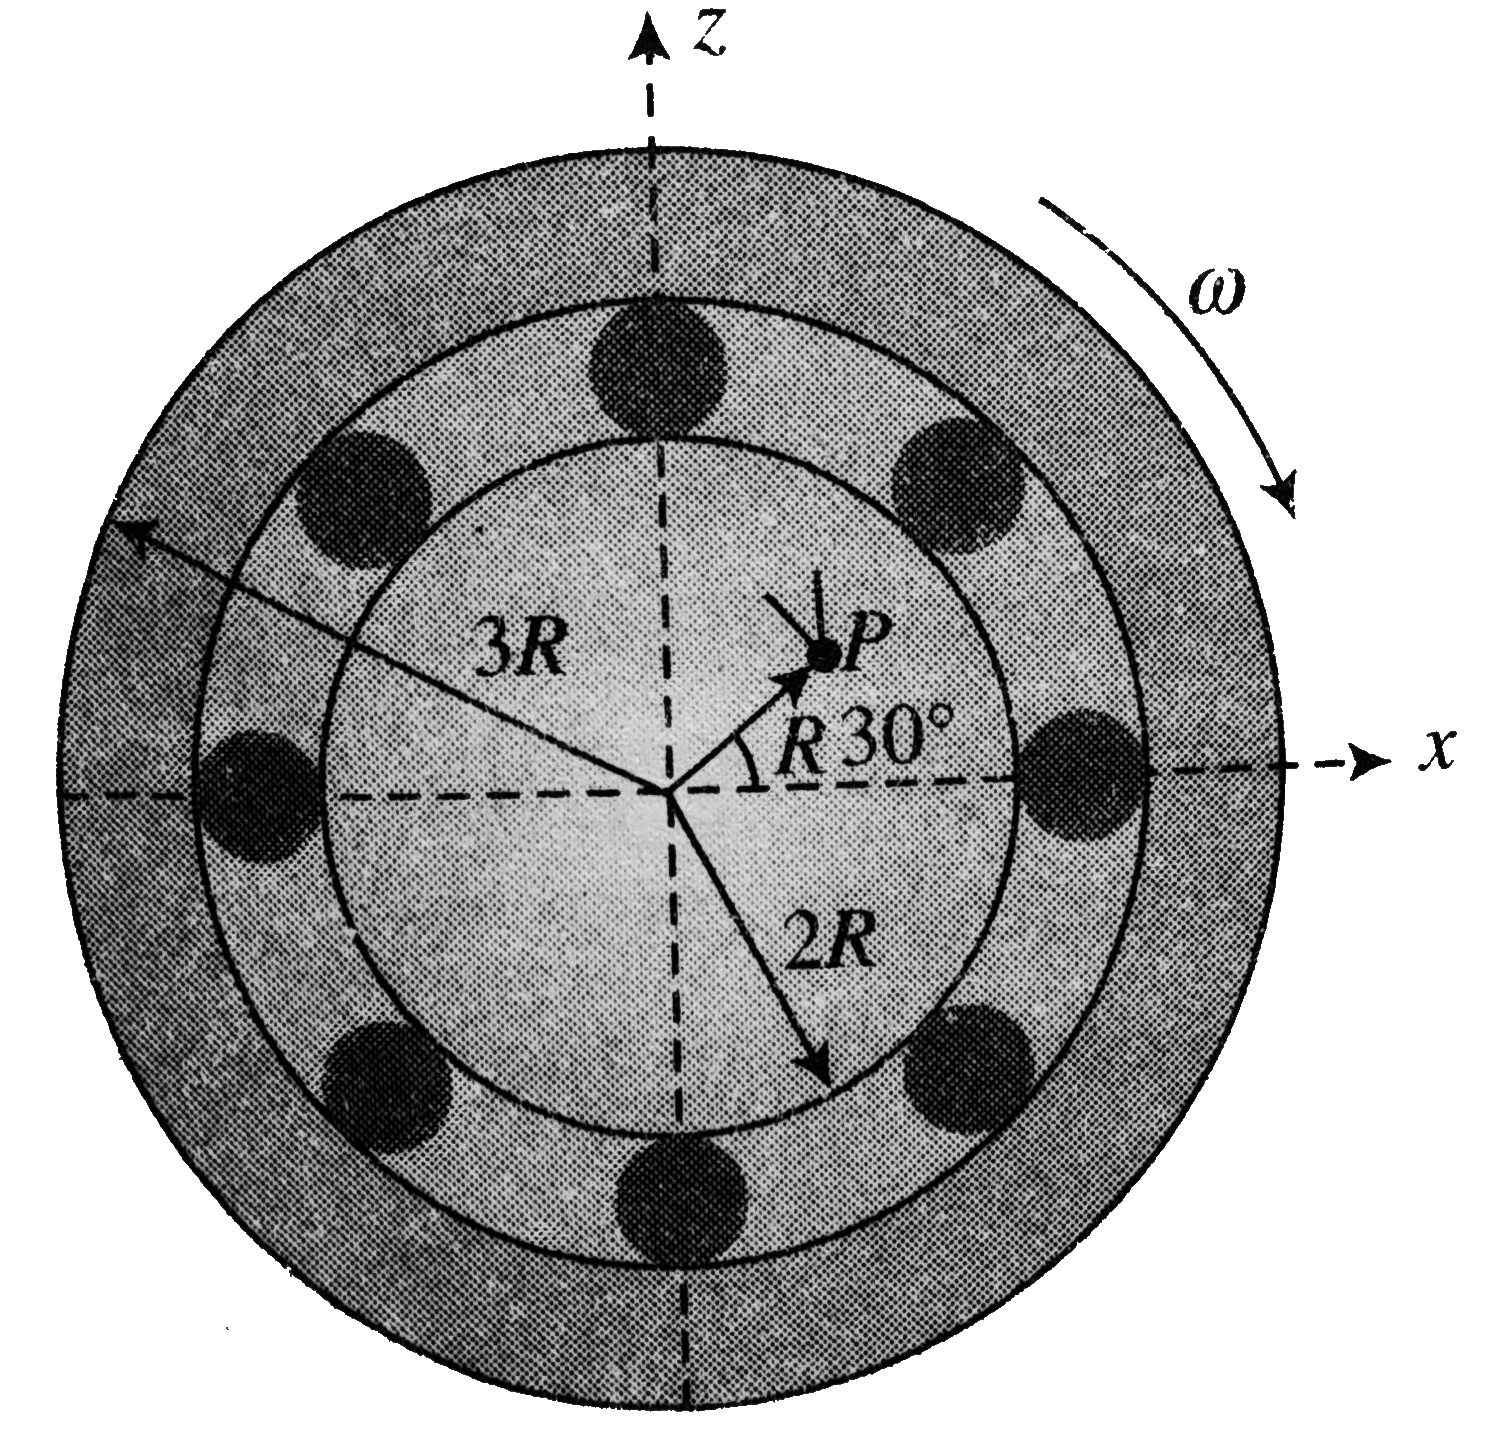 The figure shows a system consisting of (i) a ring of outer radius 3R rolling clockwise without slipping on a horizontal surface with angular speed co and (ii) an inner disc of radius 2R rotating anti-clockwise with angular speed omega//2. The ring and disc are separated by frictionless ball bearings. The system is in the x-z plane. The point P on the inner disc is at distance R from the origin, where OP makes an angled of 30^@ with the horizontal. Then with respect to the horizontal surface,